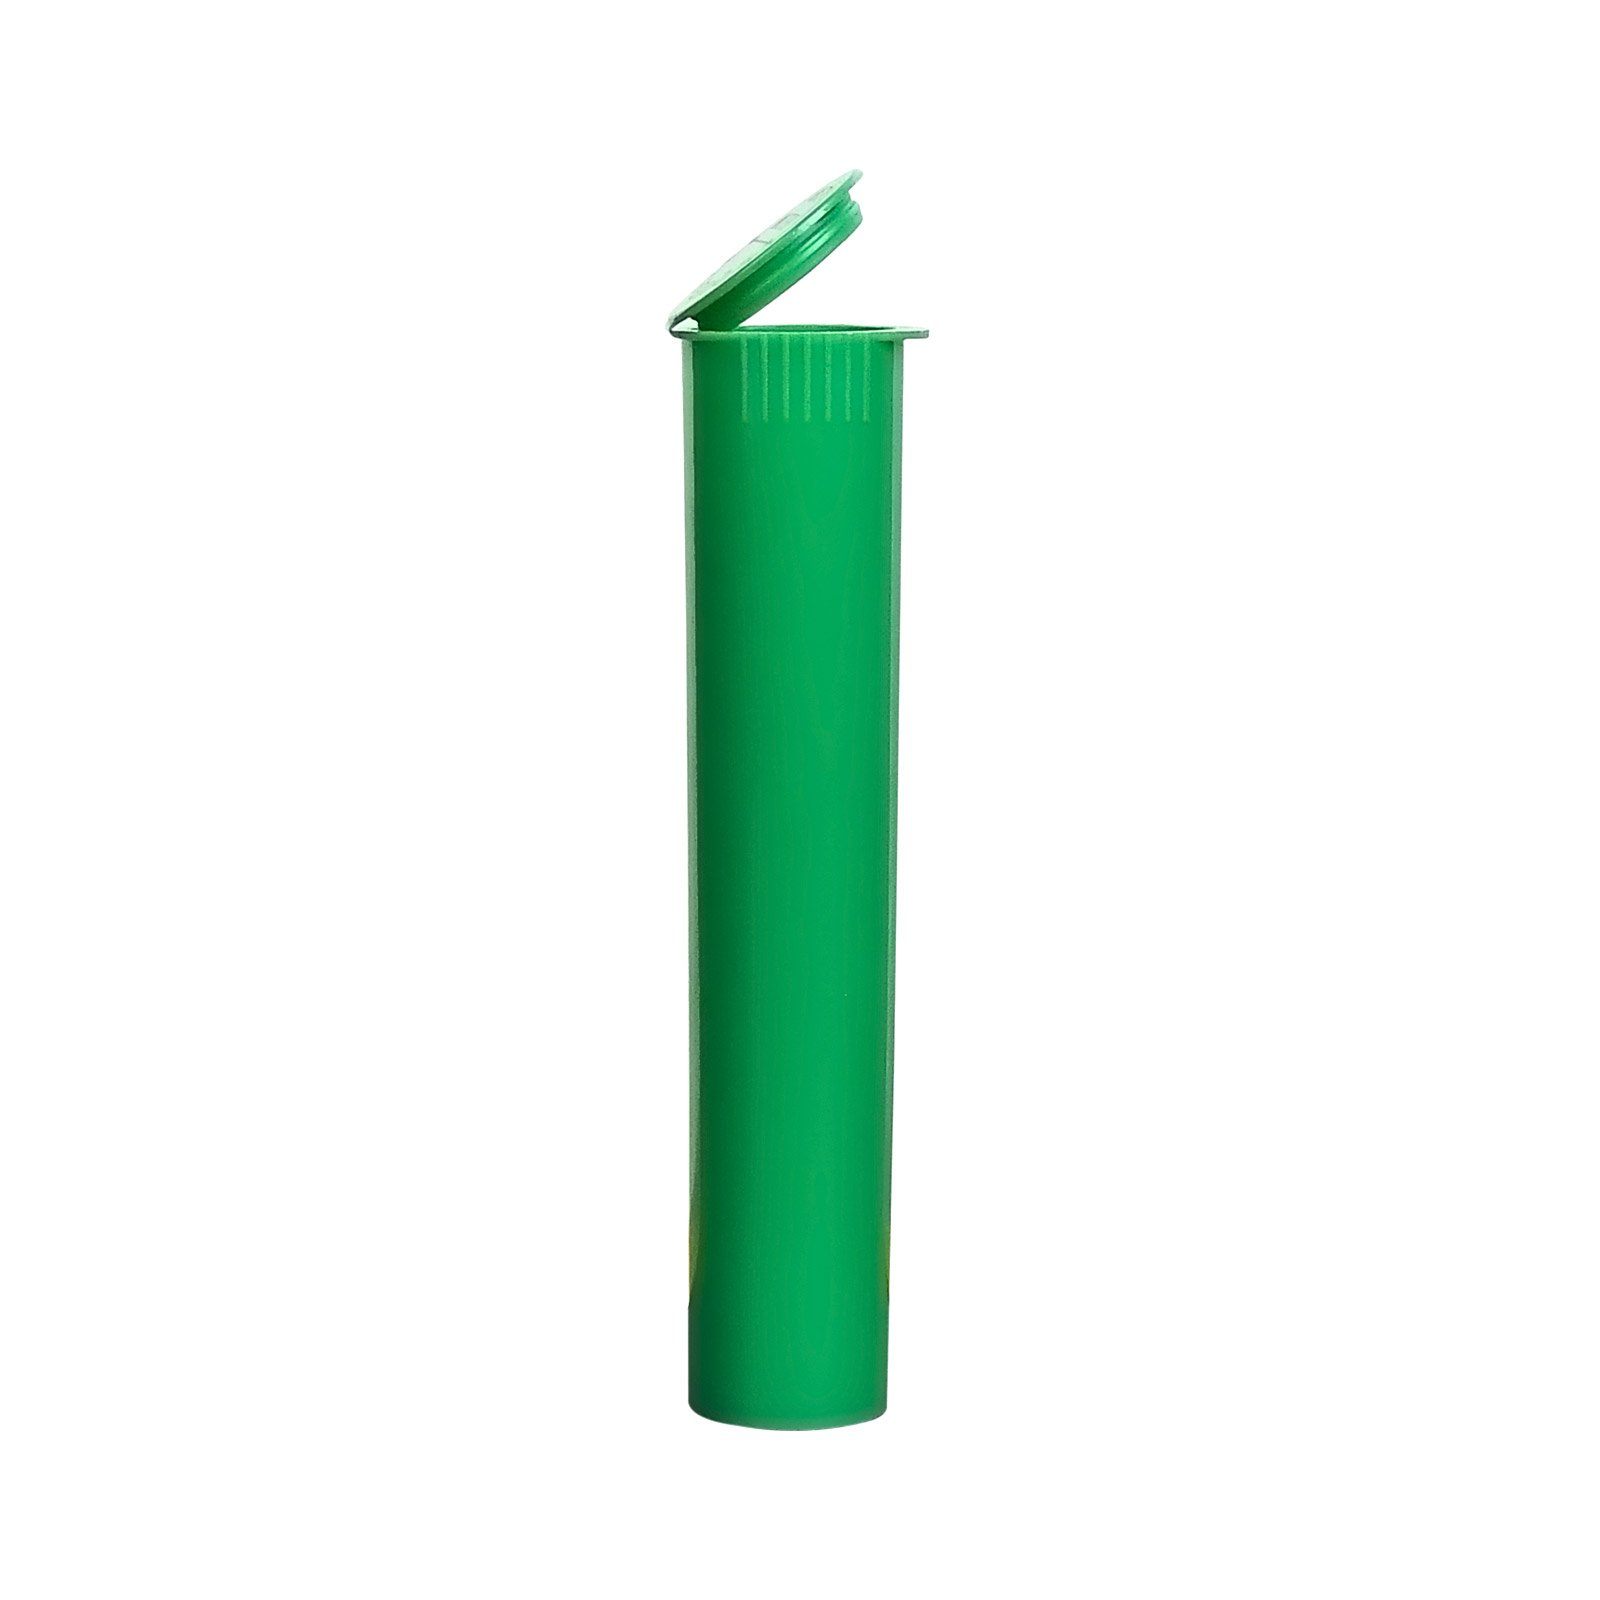 98mm Pre-Roll RX Squeeze Tubes Opaque Green - 700 Count at Flower Power Packages